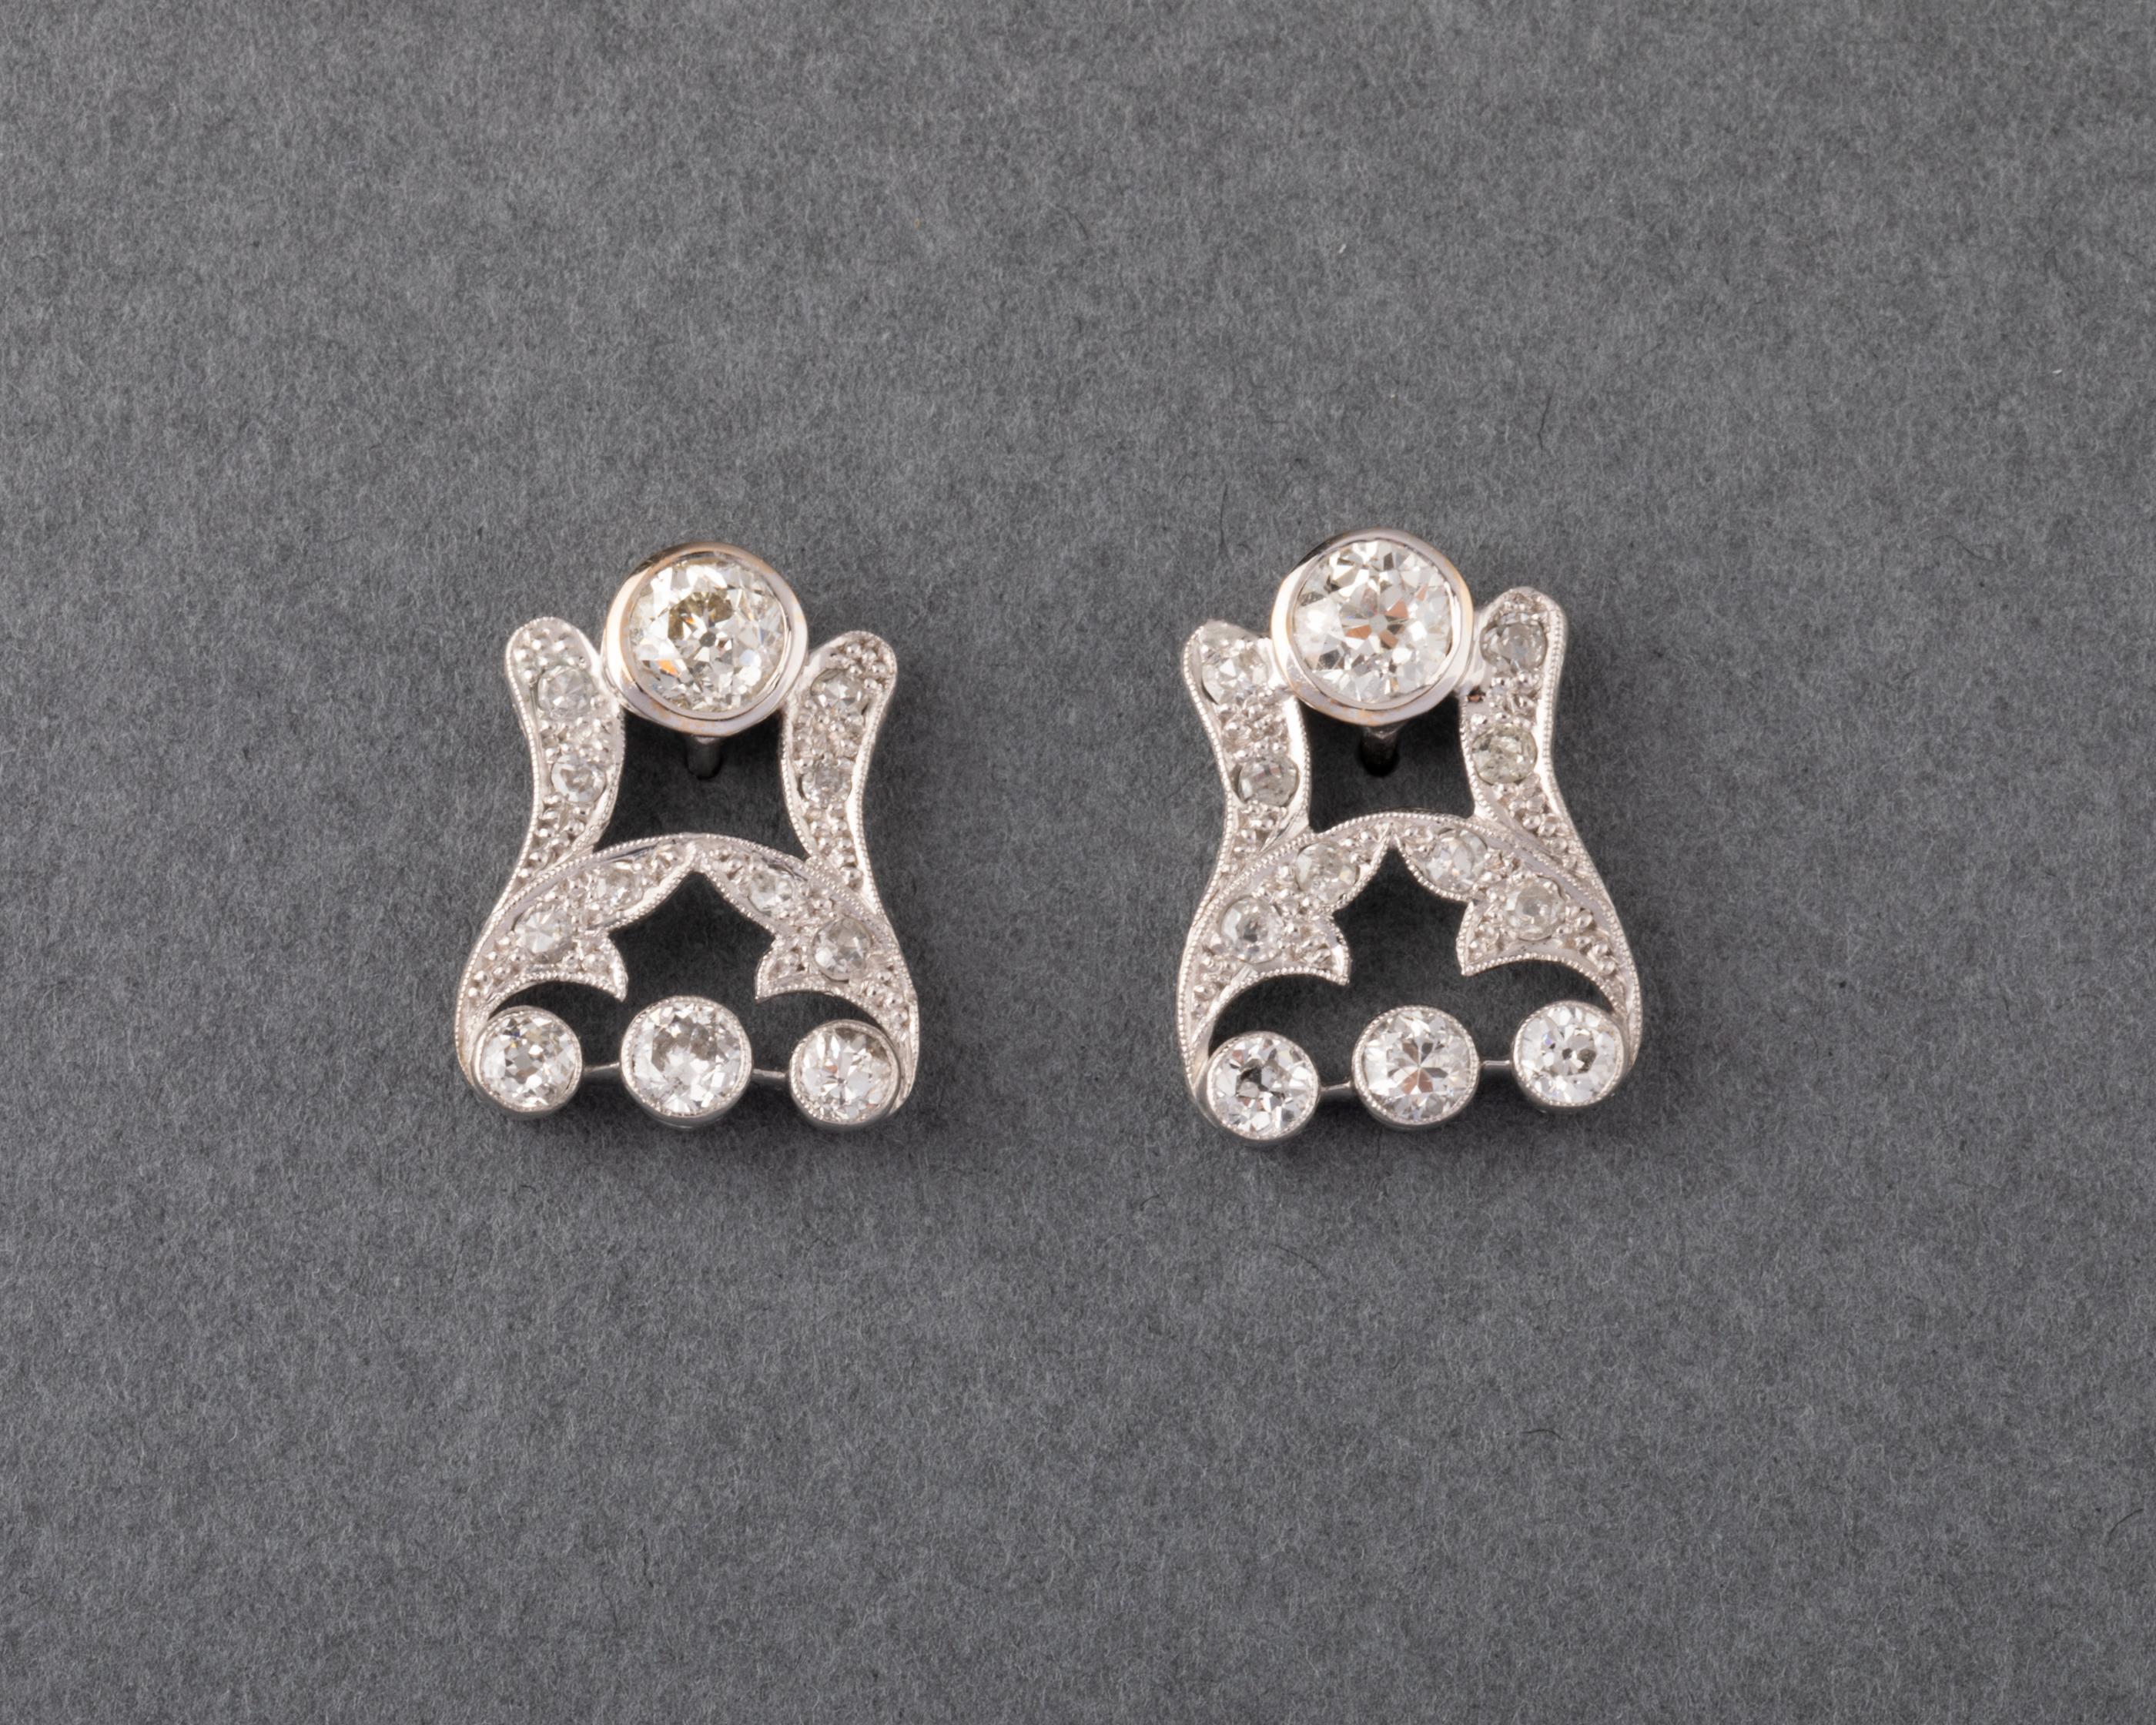 One lovely pair of earrings, European made circa 1930.

Made in white gold 18k and set with approximately 0.90 carats of diamonds per earrings. Old European cut. The diamonds are good quality, white color and good clarity. The two principal diamonds